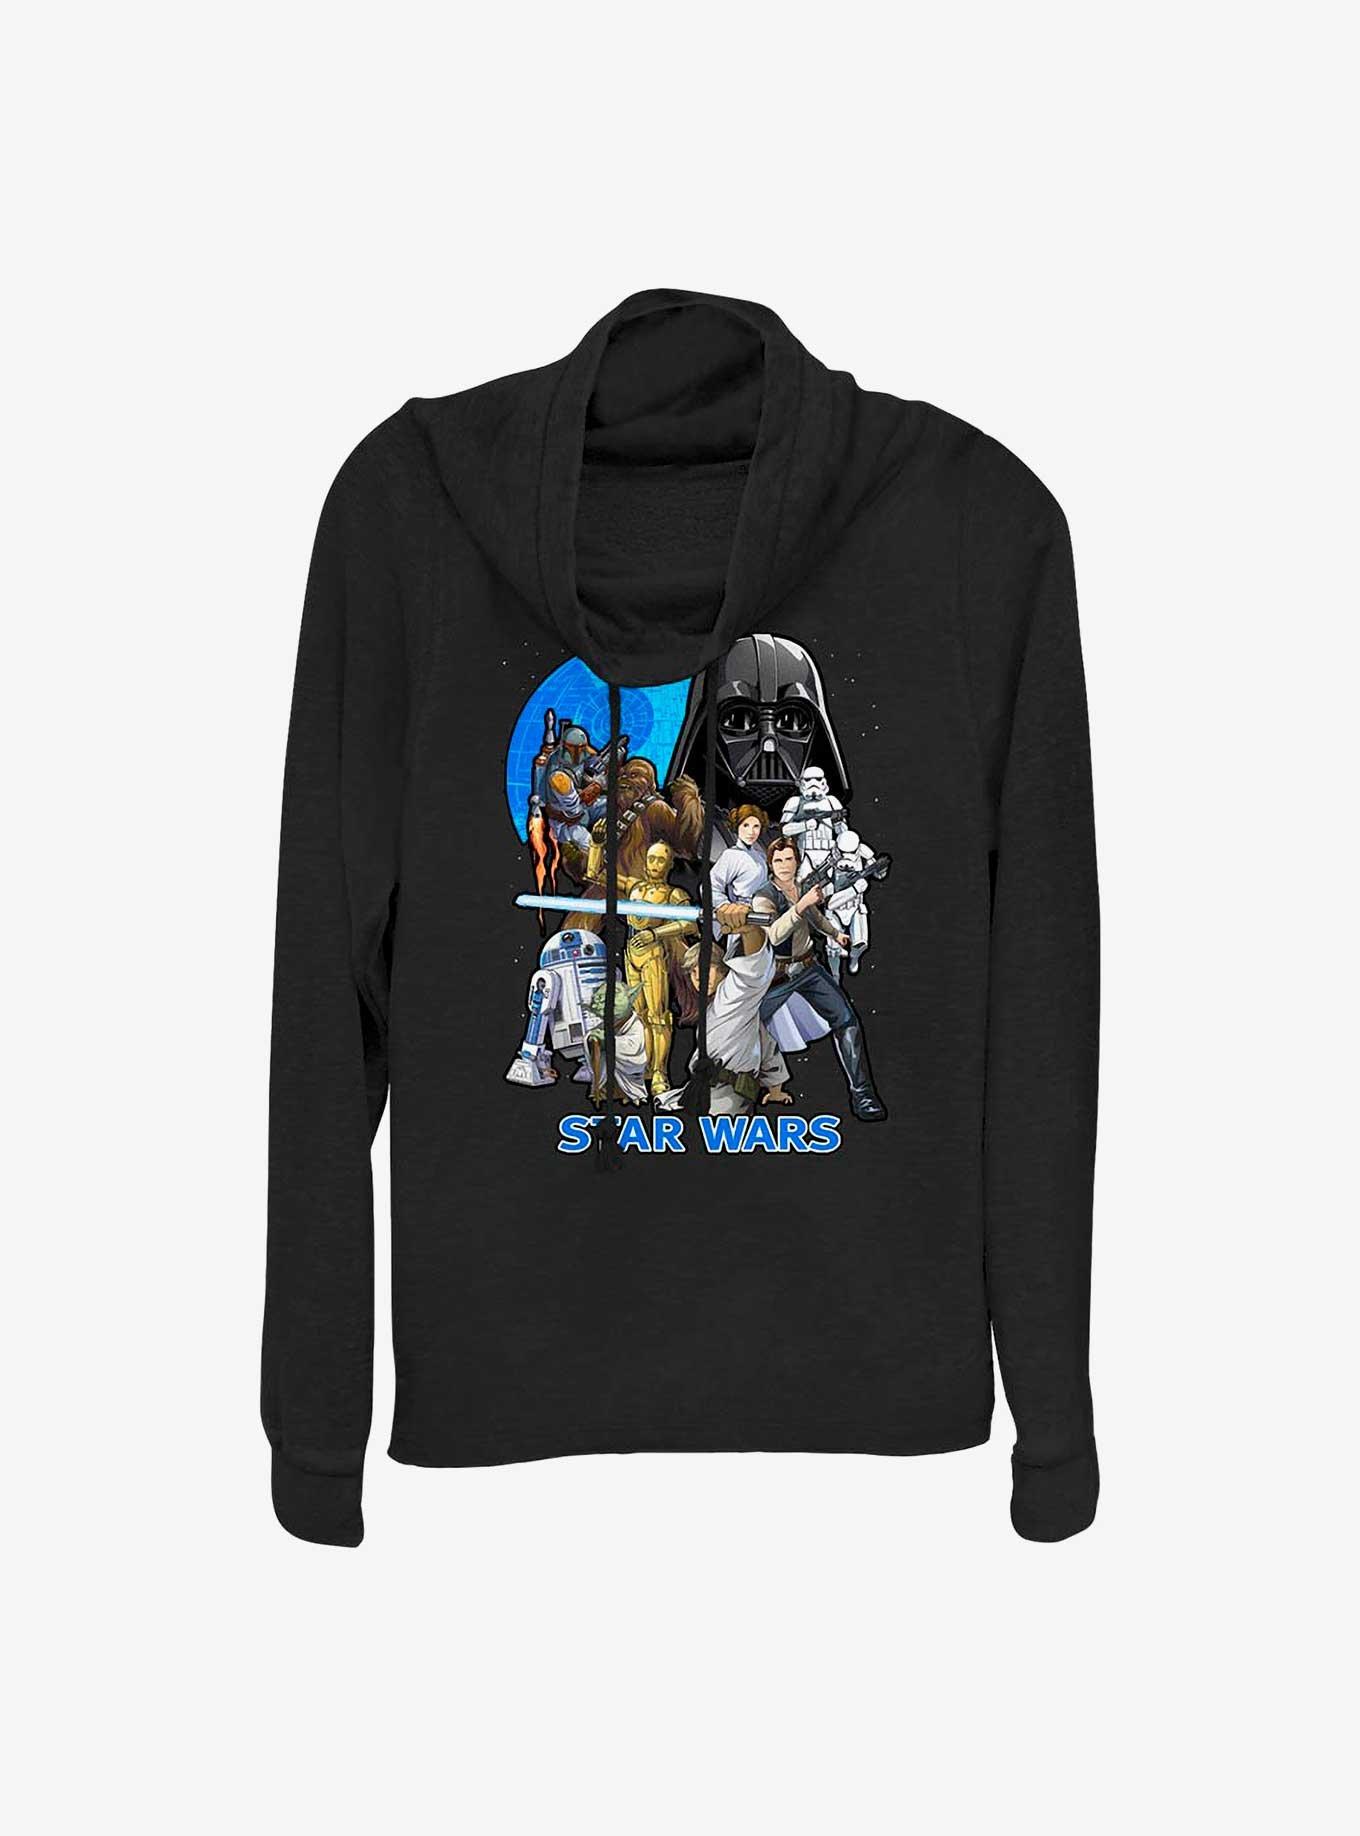 Star Wars Galaxy Fighters Cowl Neck Long-Sleeve Top, , hi-res